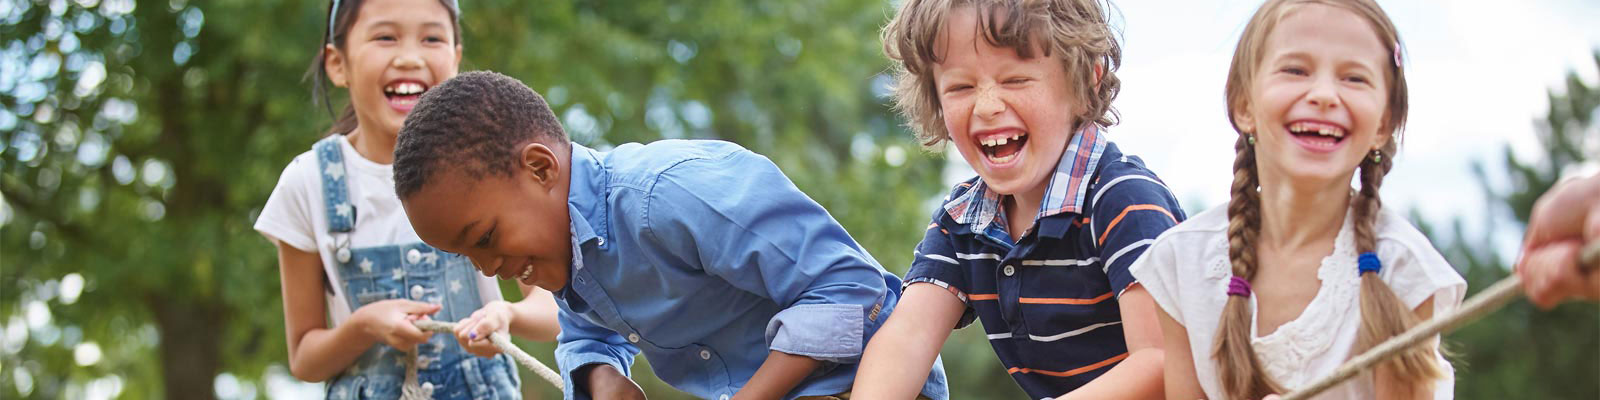 photo of children laughing at a playground